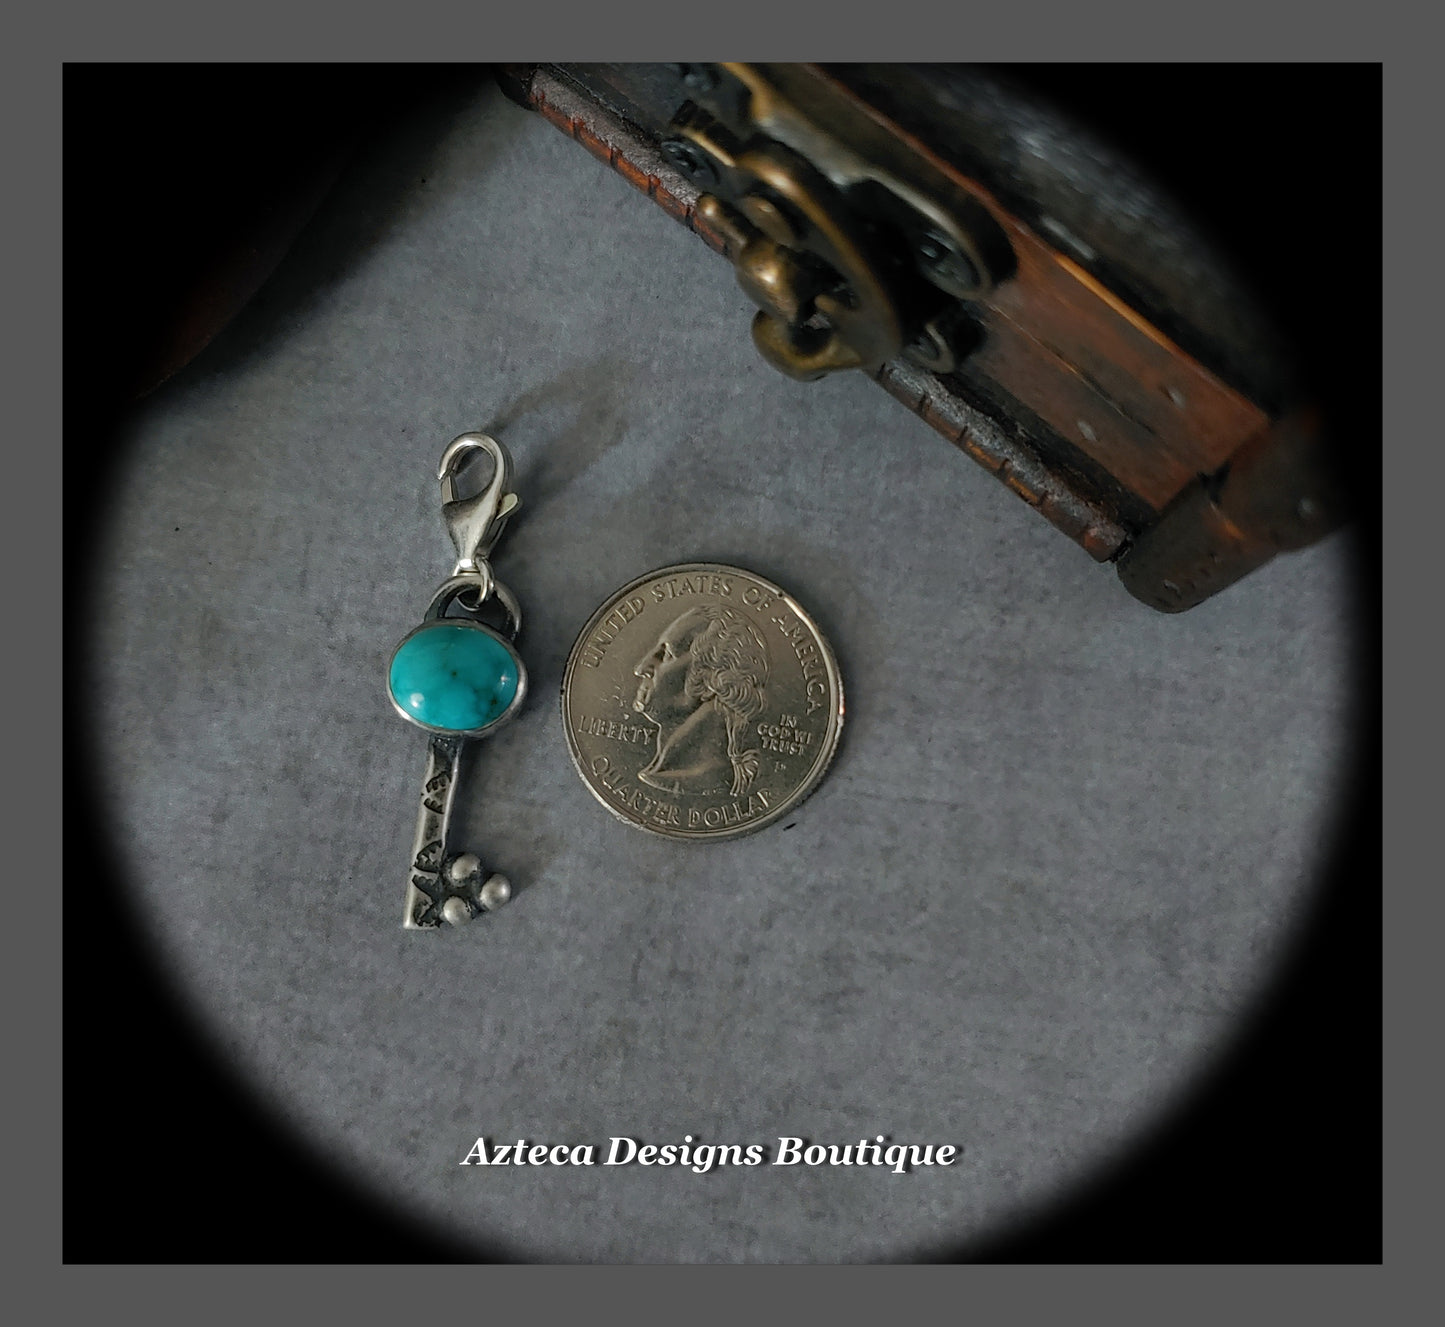 Sierra Nevada Turquoise + Sterling Silver + Clip On Charm Pendant